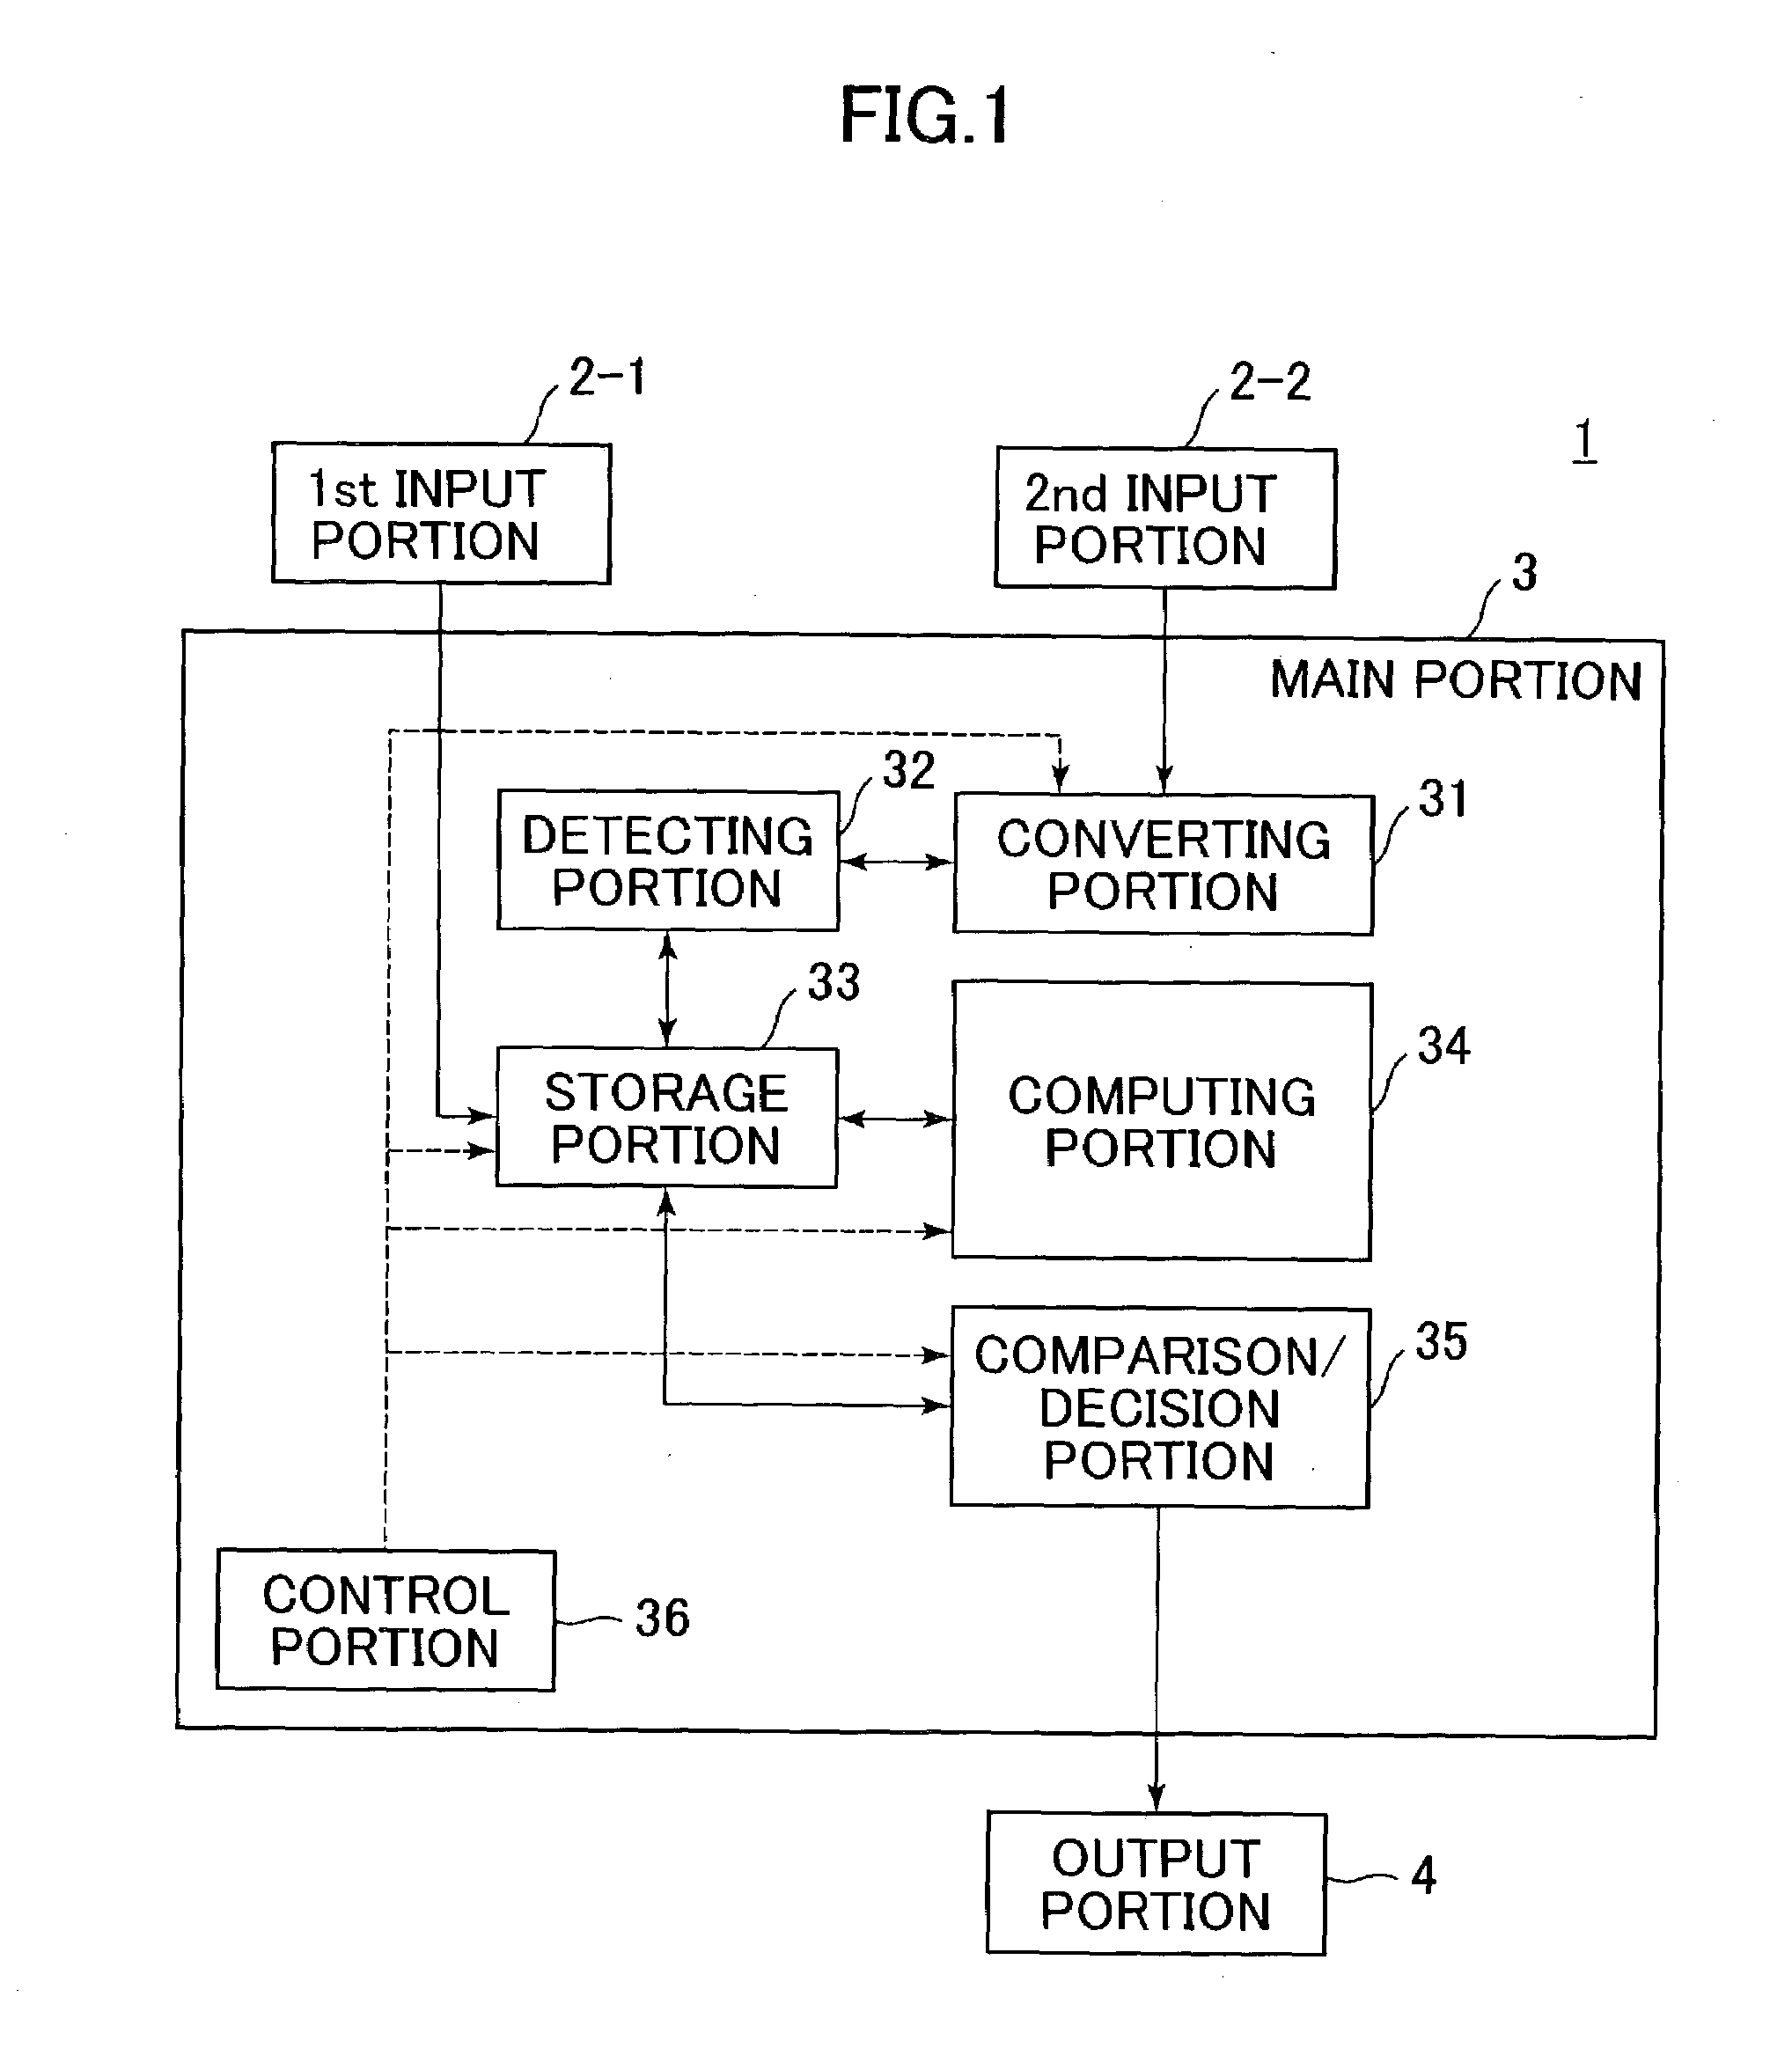 Methods and apparatus for verifying circuit board design